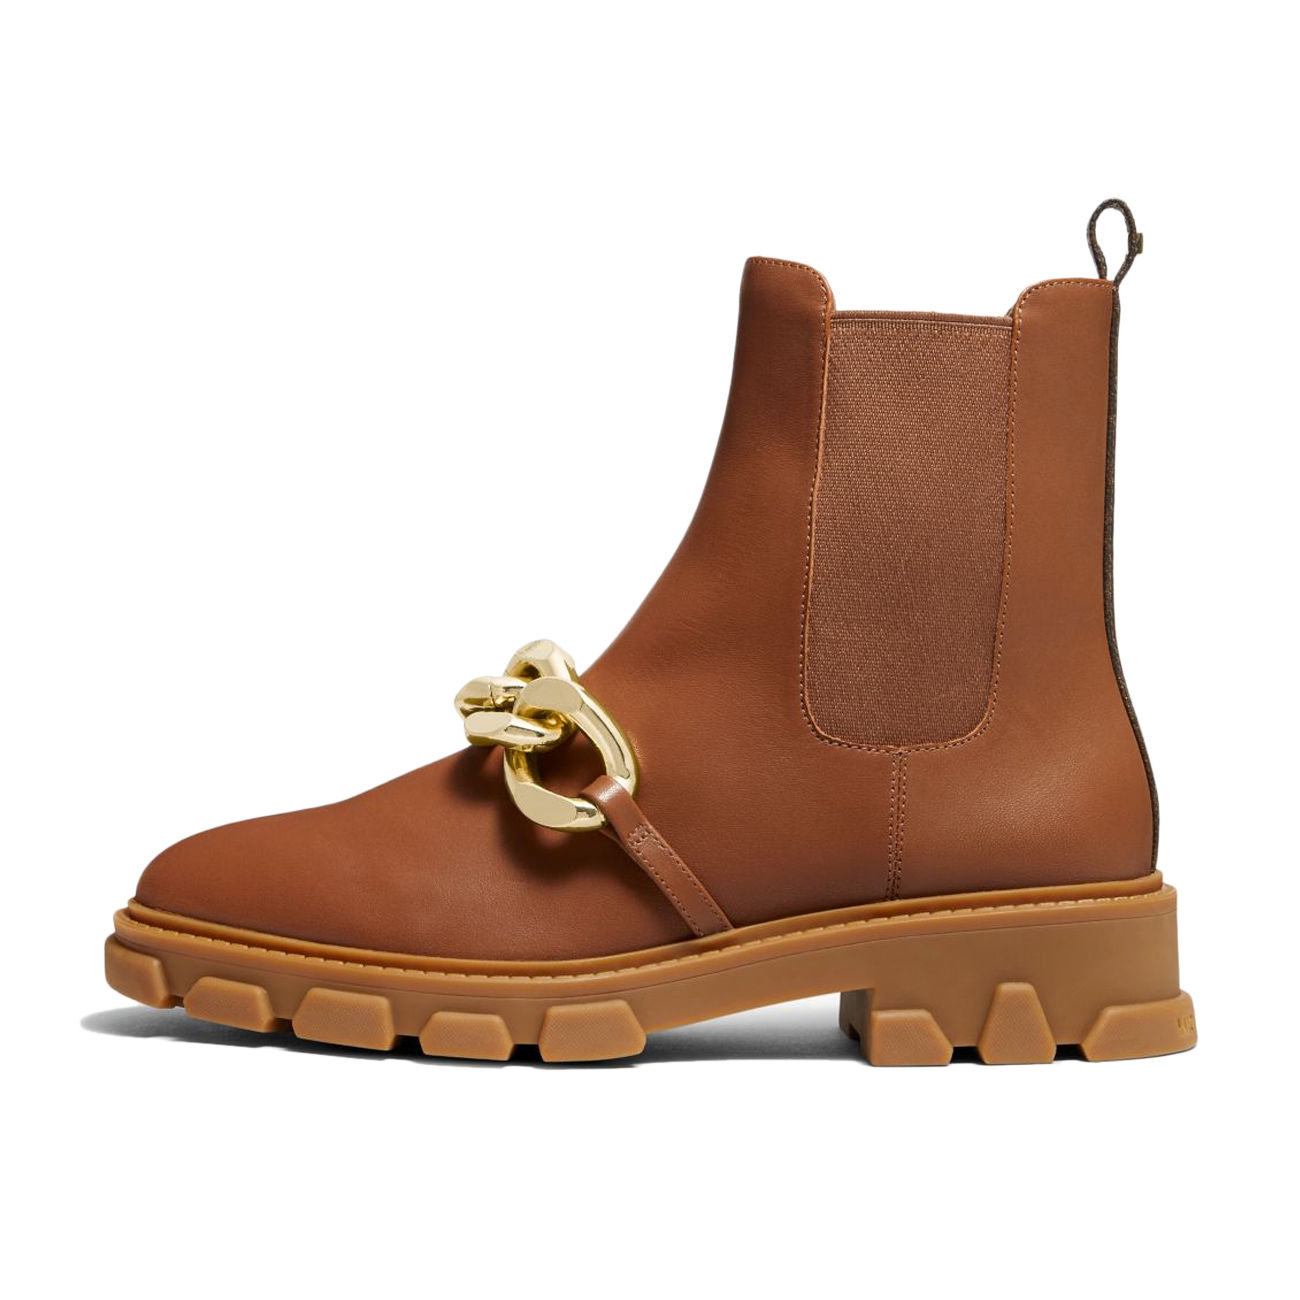 MICHAEL KORS SCARLETT BOOTS IN LEATHER WITH GOLD CHAIN ​Woman Luggage |  Mascheroni Store